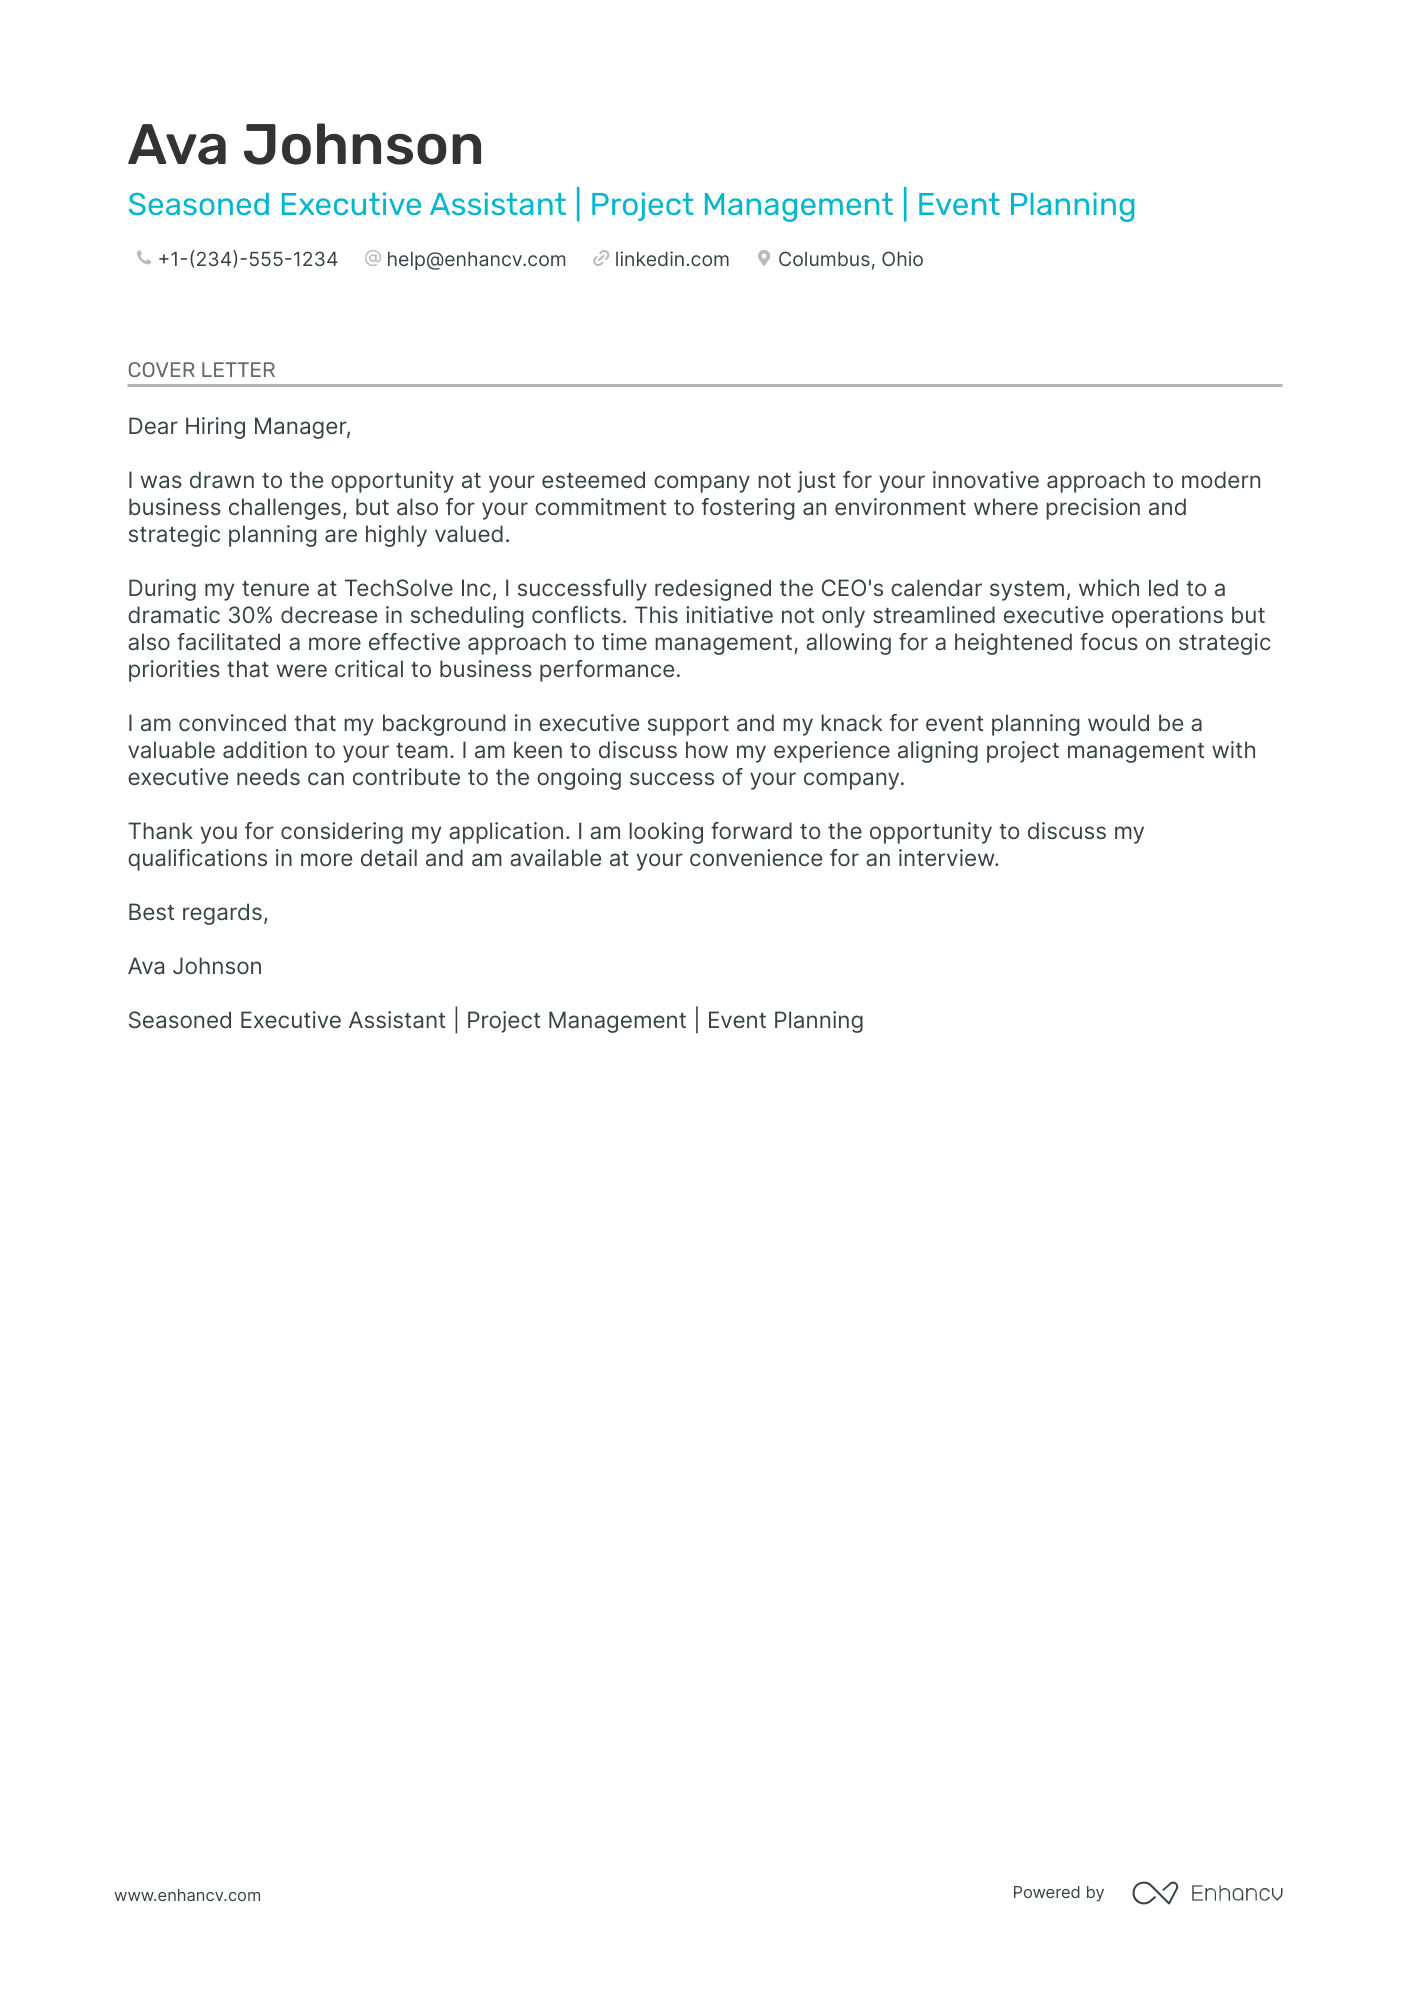 Personal Assistant cover letter